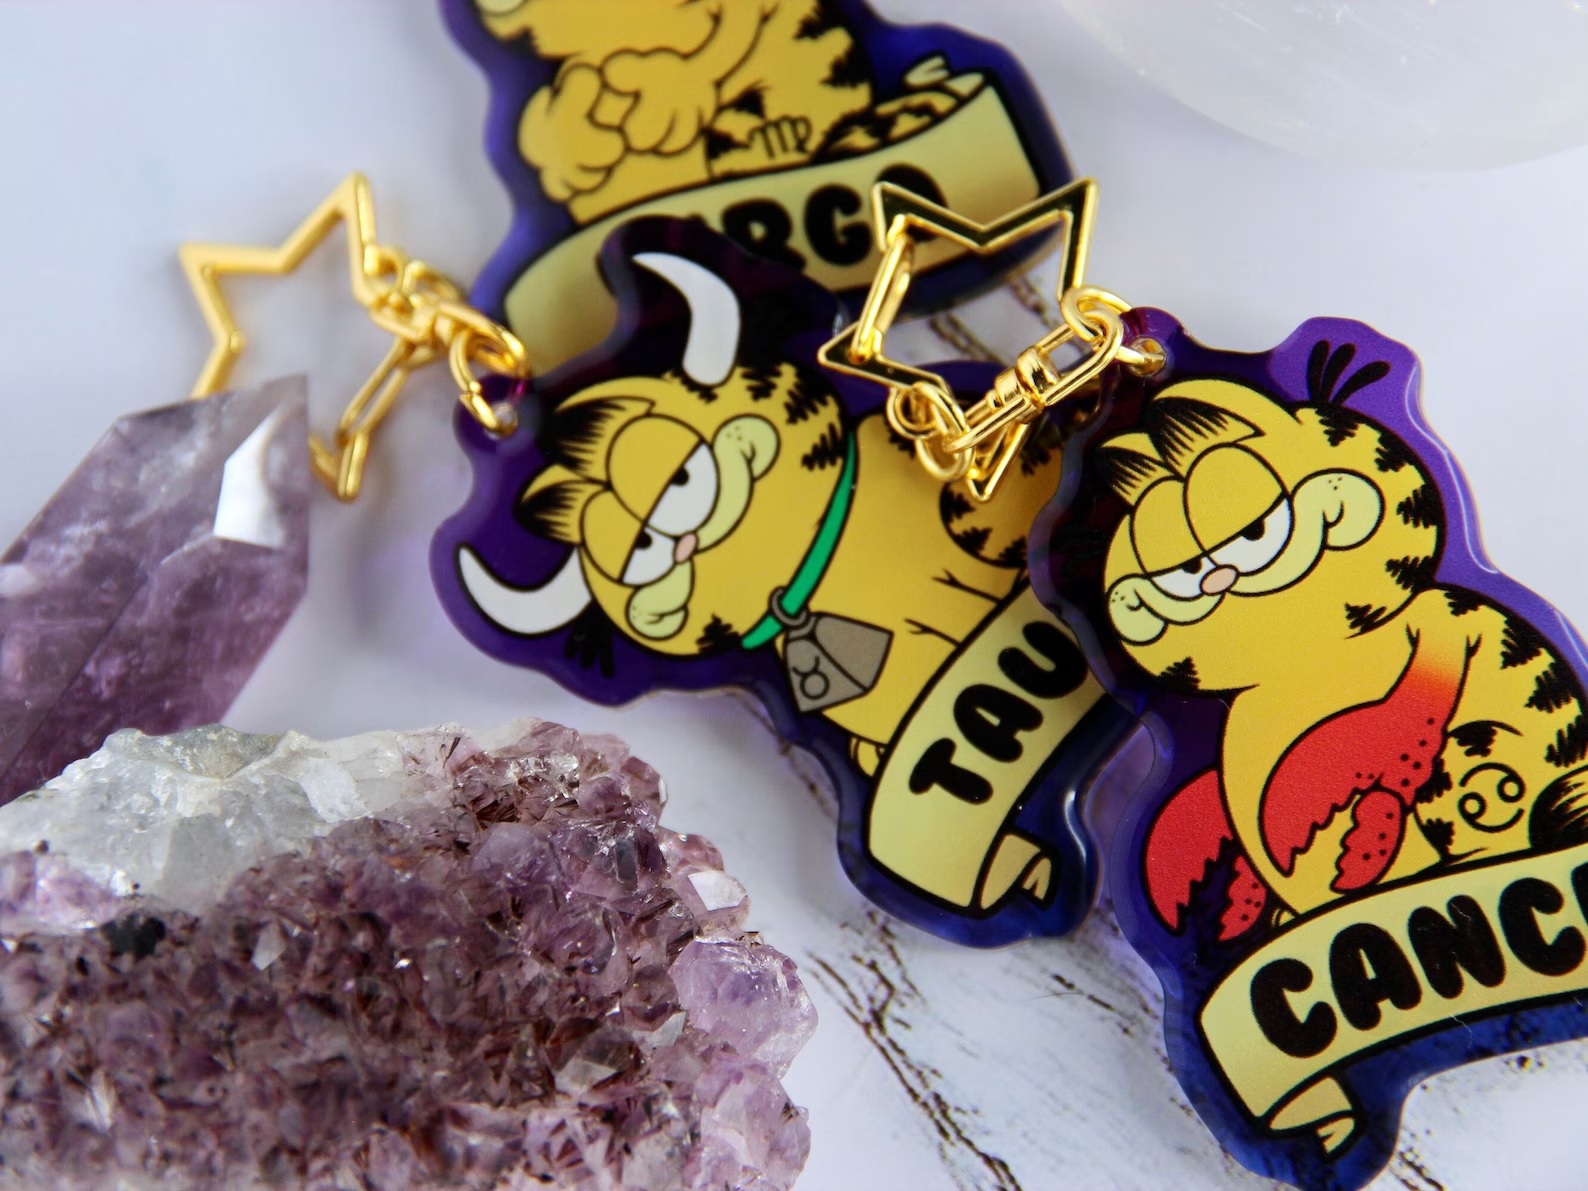 Charms with images of Garfield representing each of the zodiac signs